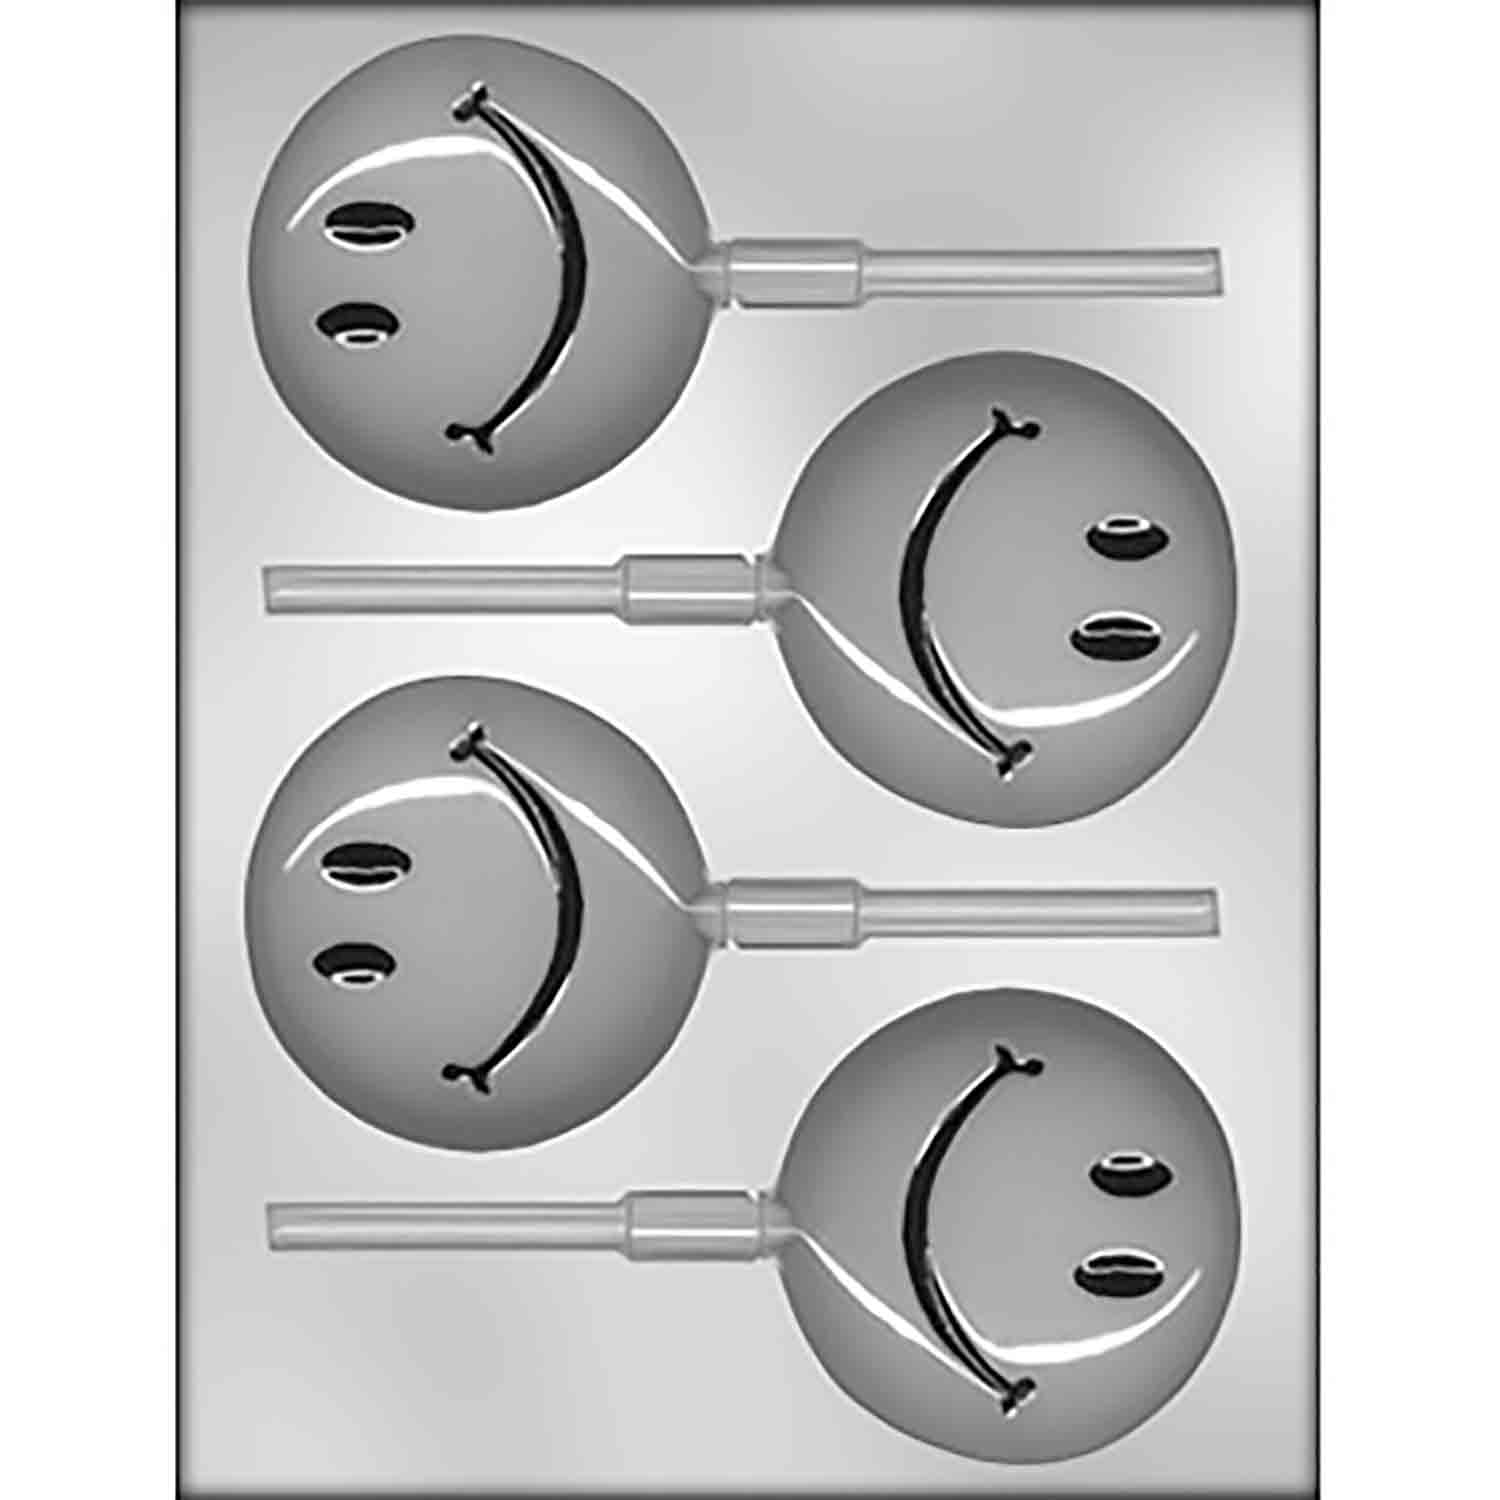 Happy Faces Silicone Chocolate Candy Mold - Country Kitchen